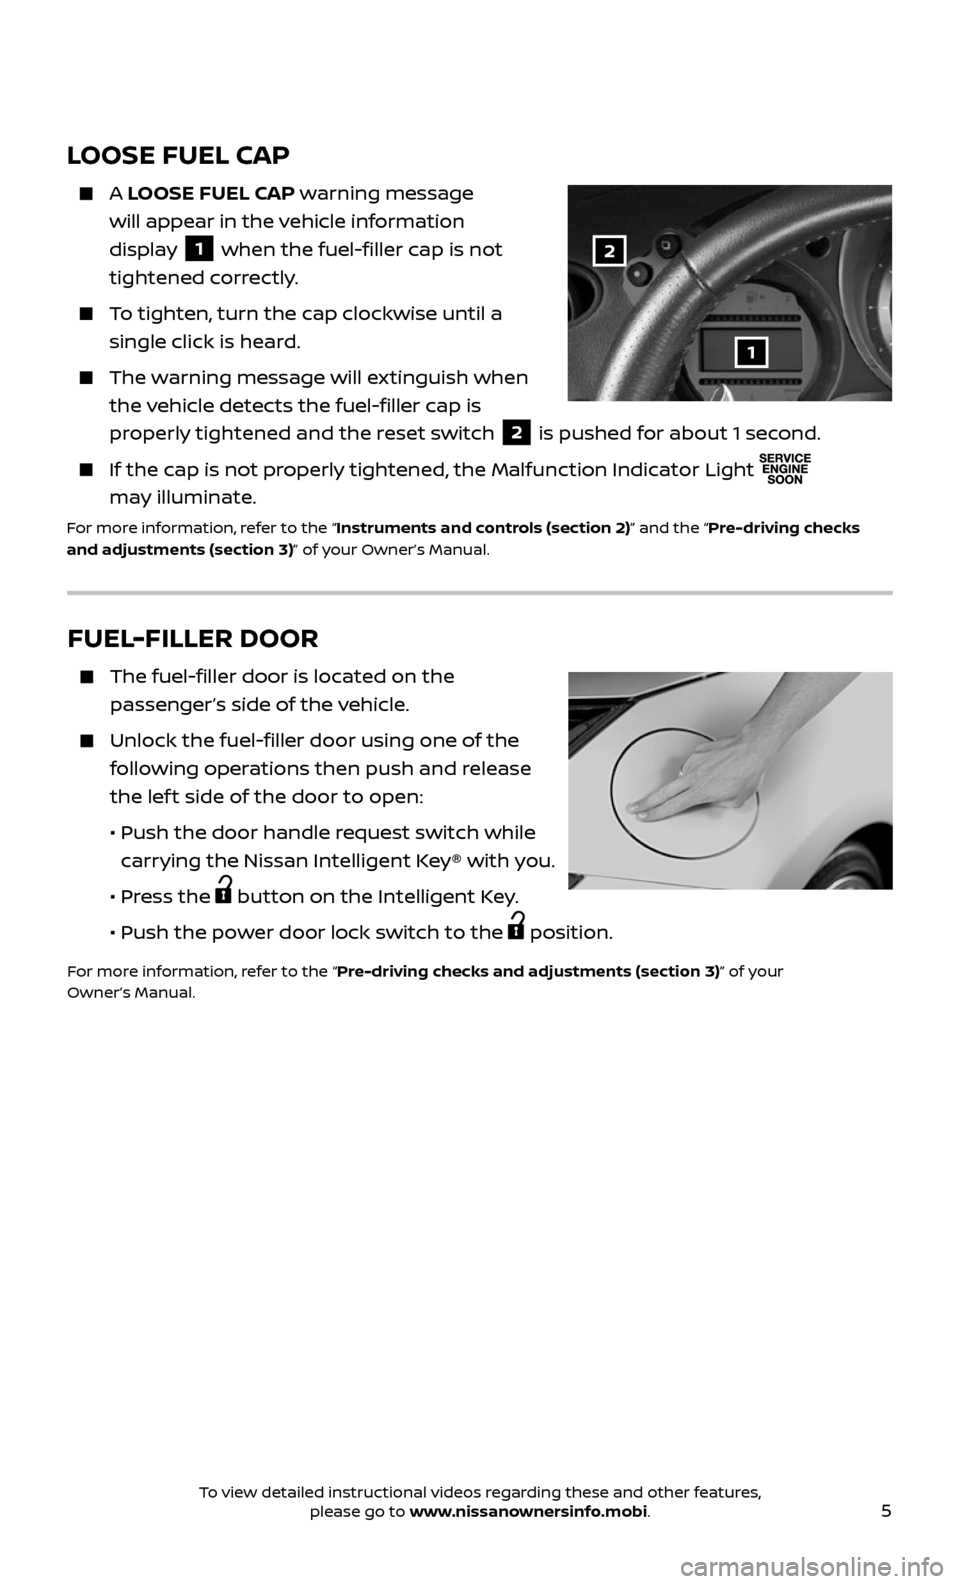 NISSAN 370Z ROADSTER 2017 Z34 Quick Reference Guide 5
FUEL-FILLER DOOR
    The fuel-filler door is located on the 
passenger’s side of the vehicle. 
    Unlock the fuel-filler door using one of the 
following operations then push and release 
the lef